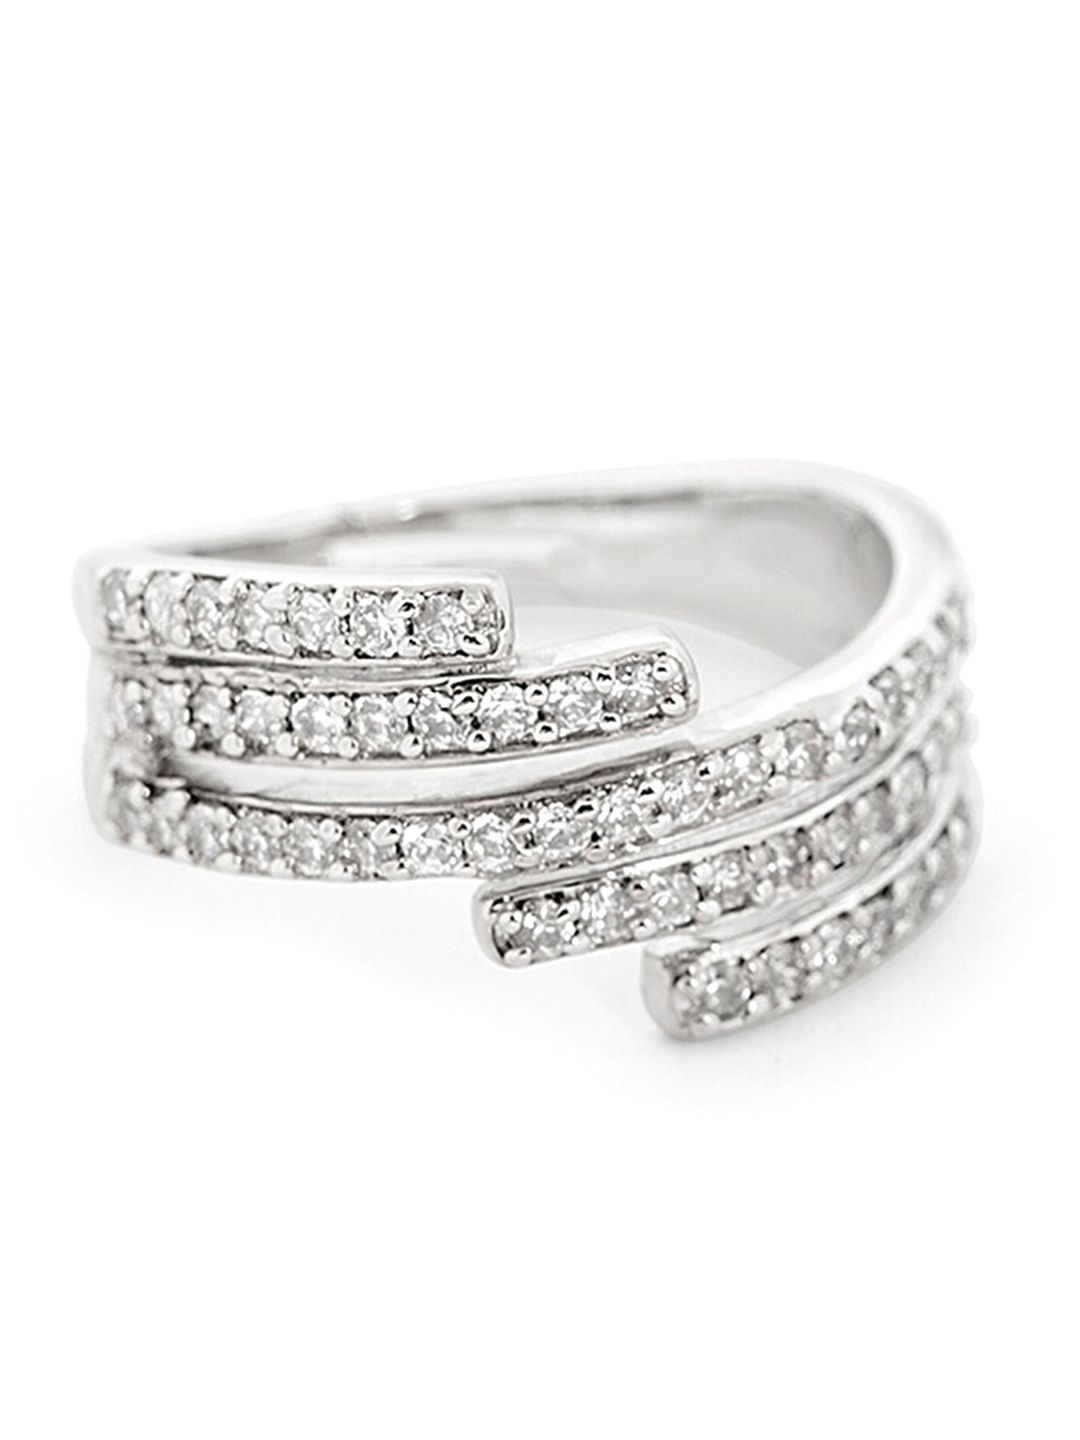 Mikoto by FableStreet Silver-Toned Rhodium-Plated & CZ Stone-Studded Finger Ring Price in India